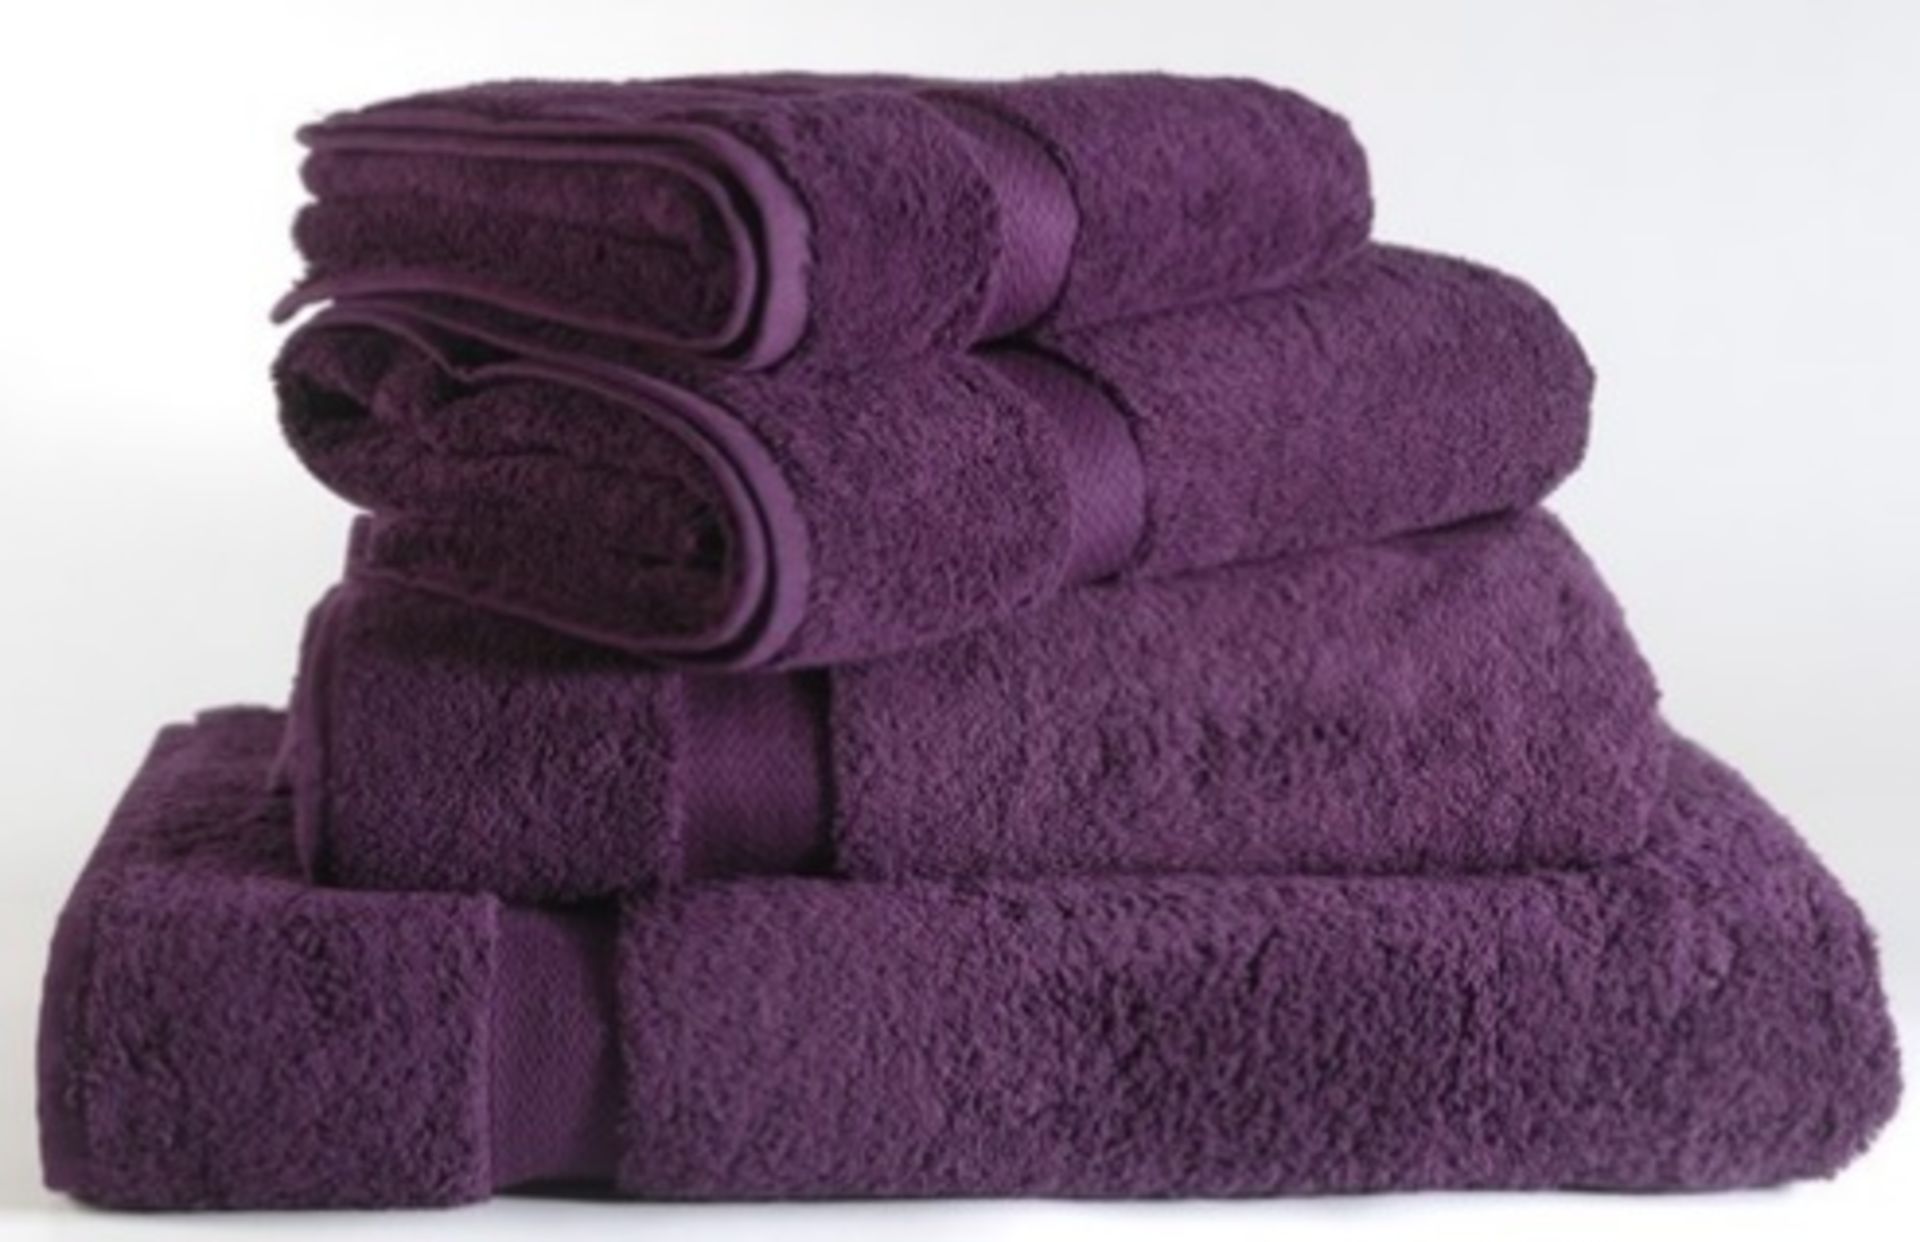 20 x Majestic Luxury 620gsm Bath Towels in Purple - Size LARGE - RRP £340 - CL587 - Location: Altrin - Image 4 of 5